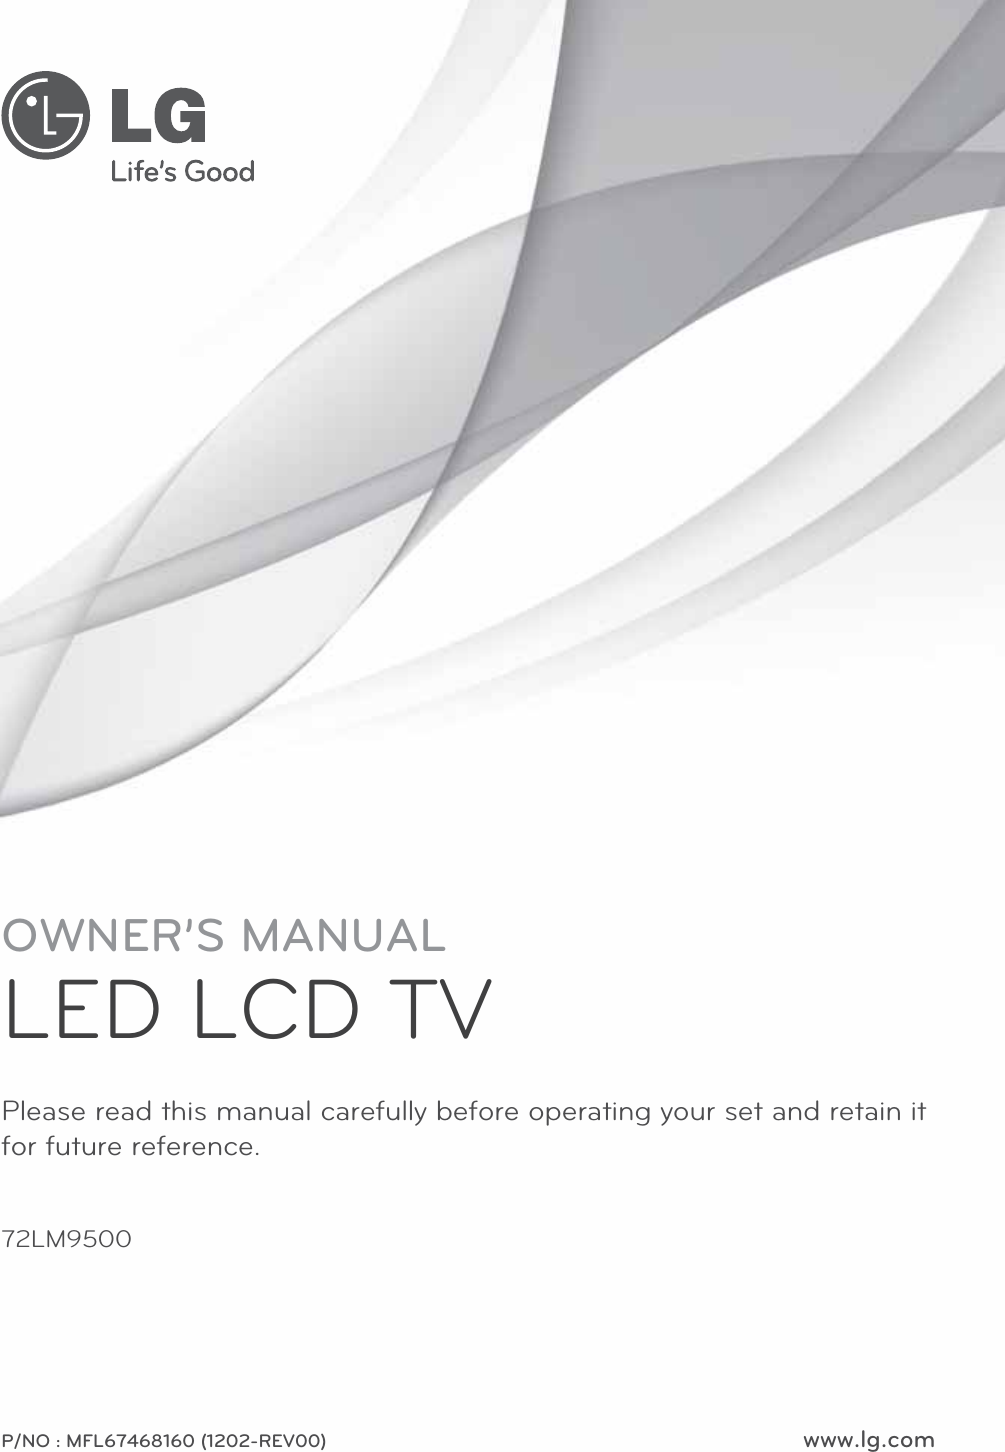 www.lg.comPlease read this manual carefully before operating your set and retain it for future reference.P/NO : MFL67468160 (1202-REV00)OWNER’S MANUALLED LCD TV72LM9500